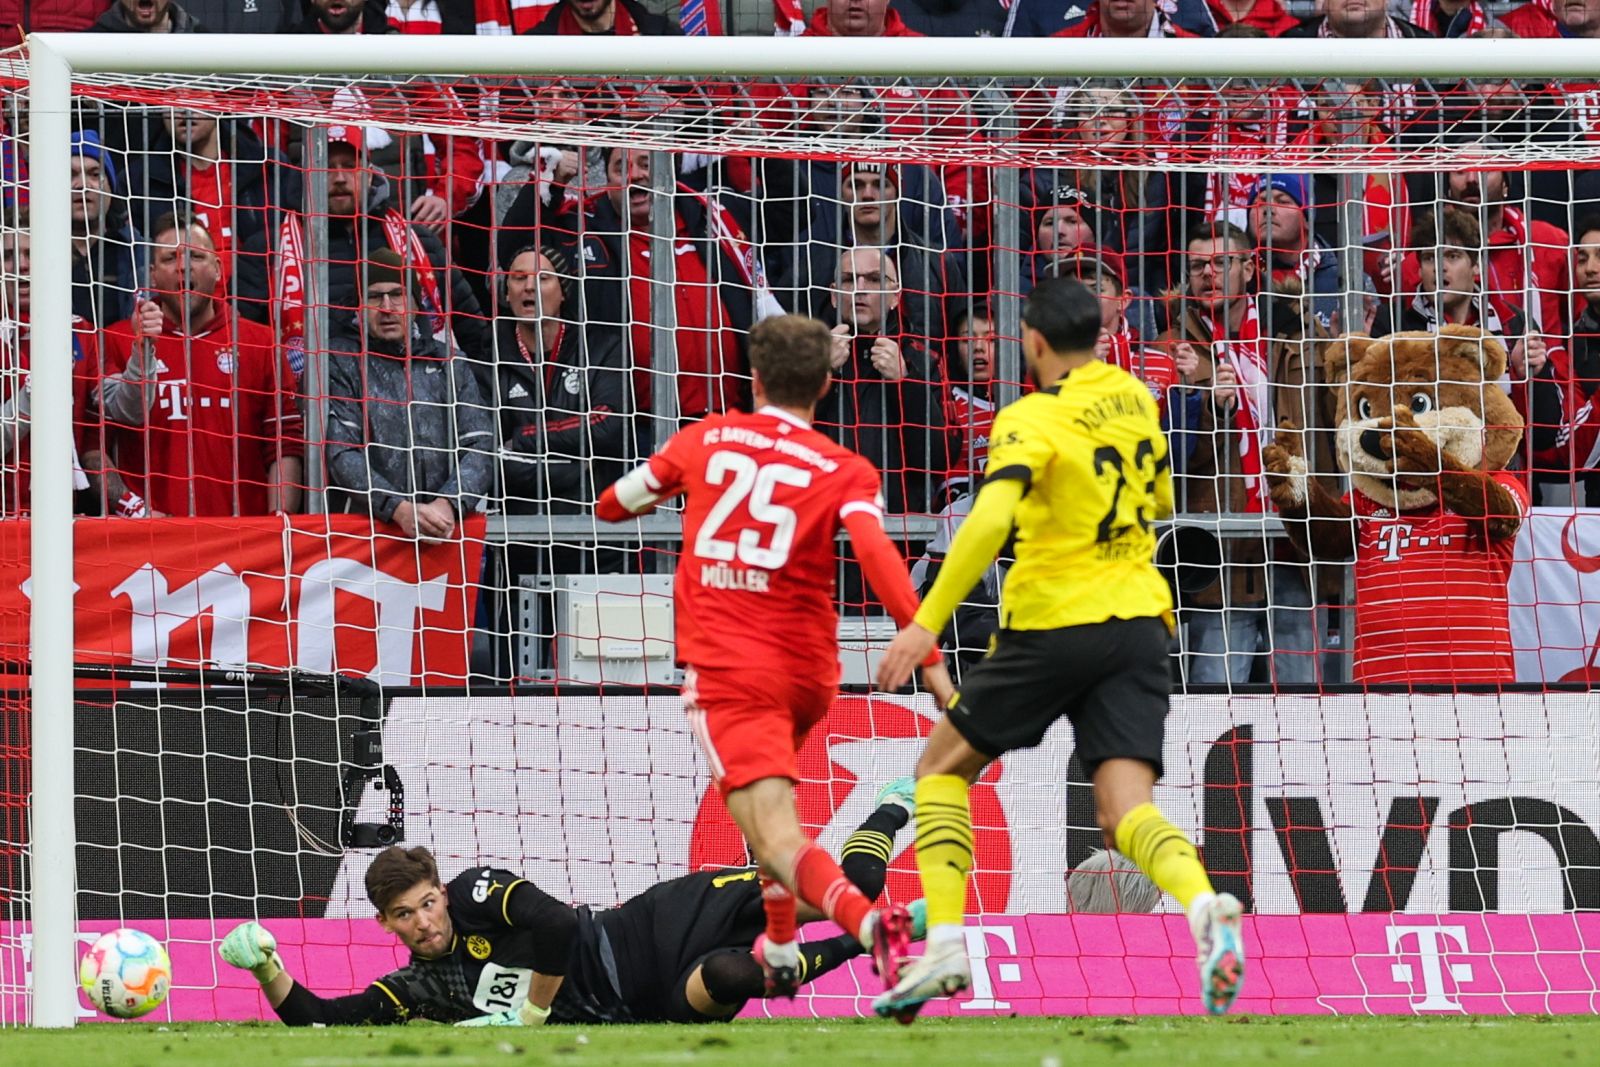 epa10554043 Munich's Thomas Mueller scores a goal during the German Bundesliga soccer match between FC Bayern Munich and Borussia Dortmund in Munich, Germany, 01 April 2023.  EPA/ANNA SZILAGYI CONDITIONS - ATTENTION: The DFL regulations prohibit any use of photographs as image sequences and/or quasi-video.